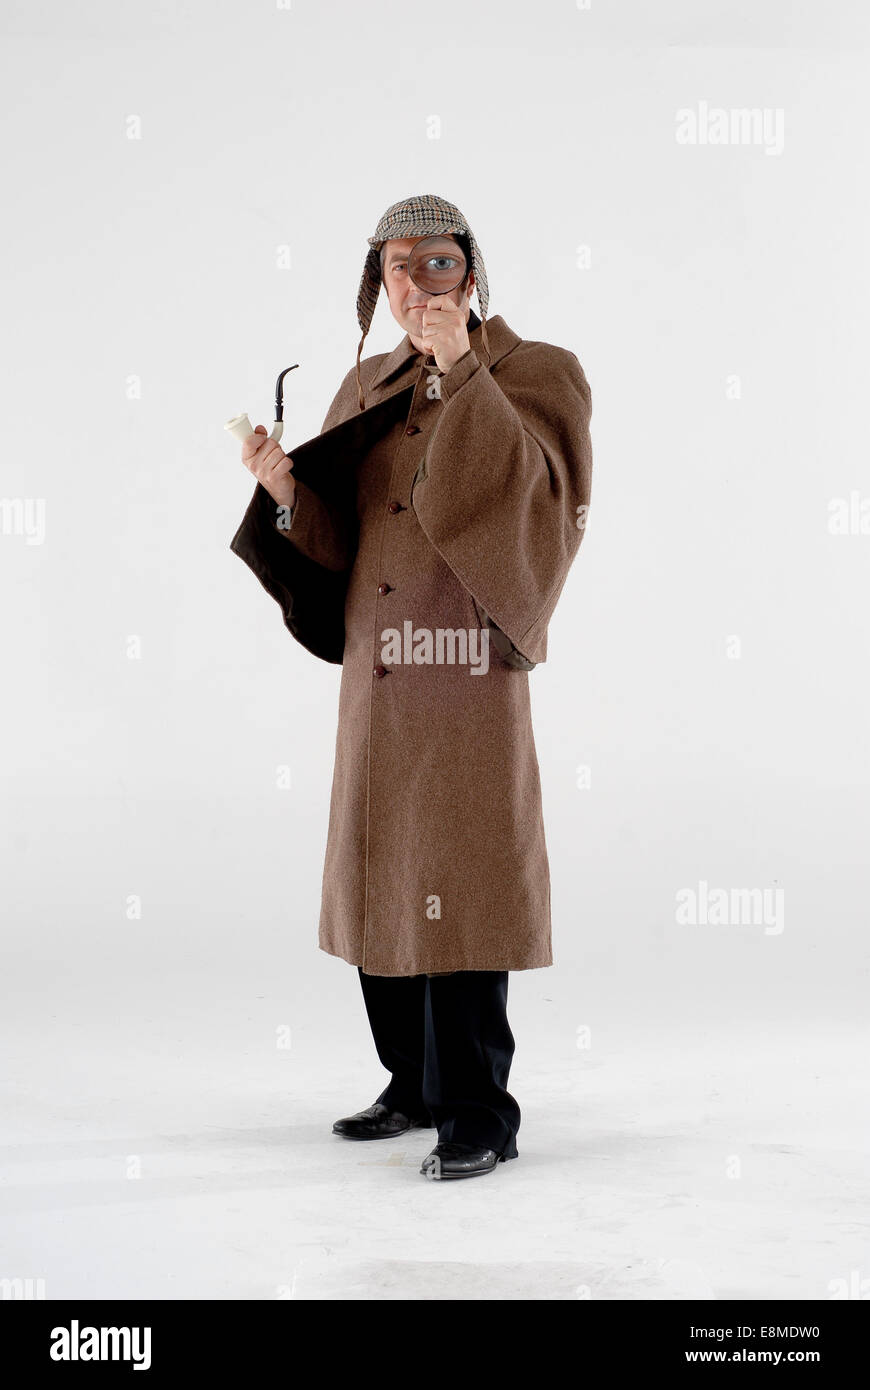 man dressed in victorian sherlock holmes outfit from the popular books and TV show, with deerstalker hat, cloak, pipe, glass Stock Photo